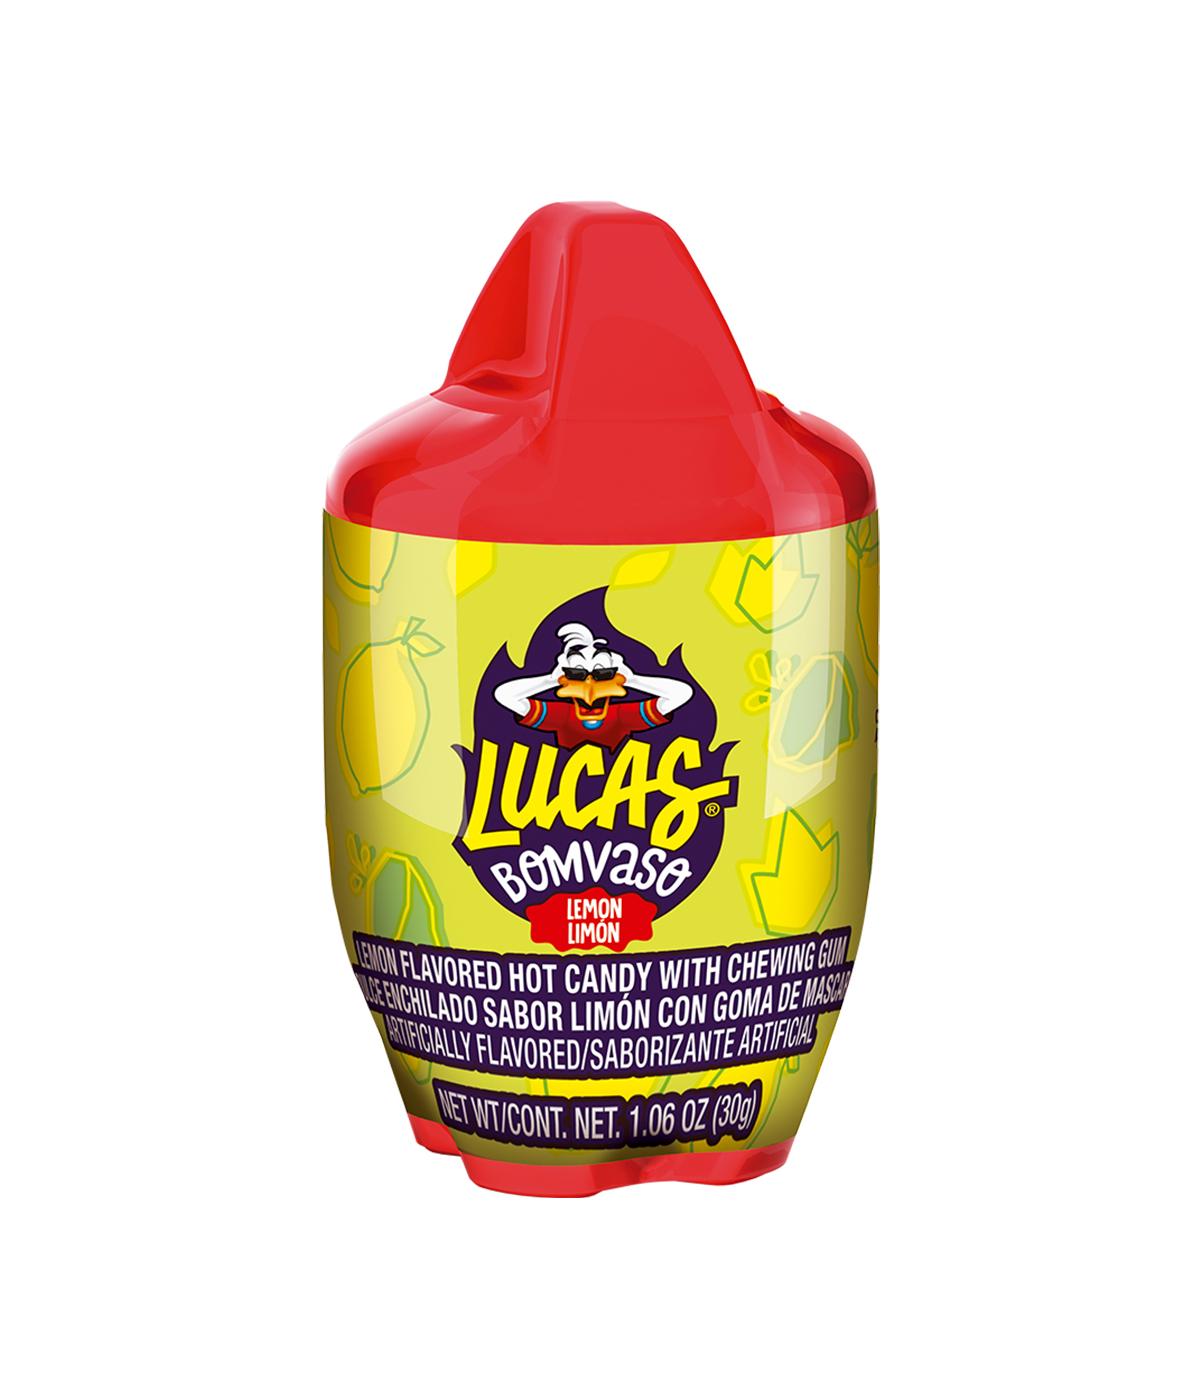 Lucas Bomvaso Lemon Candy with Chewing Gum; image 1 of 3